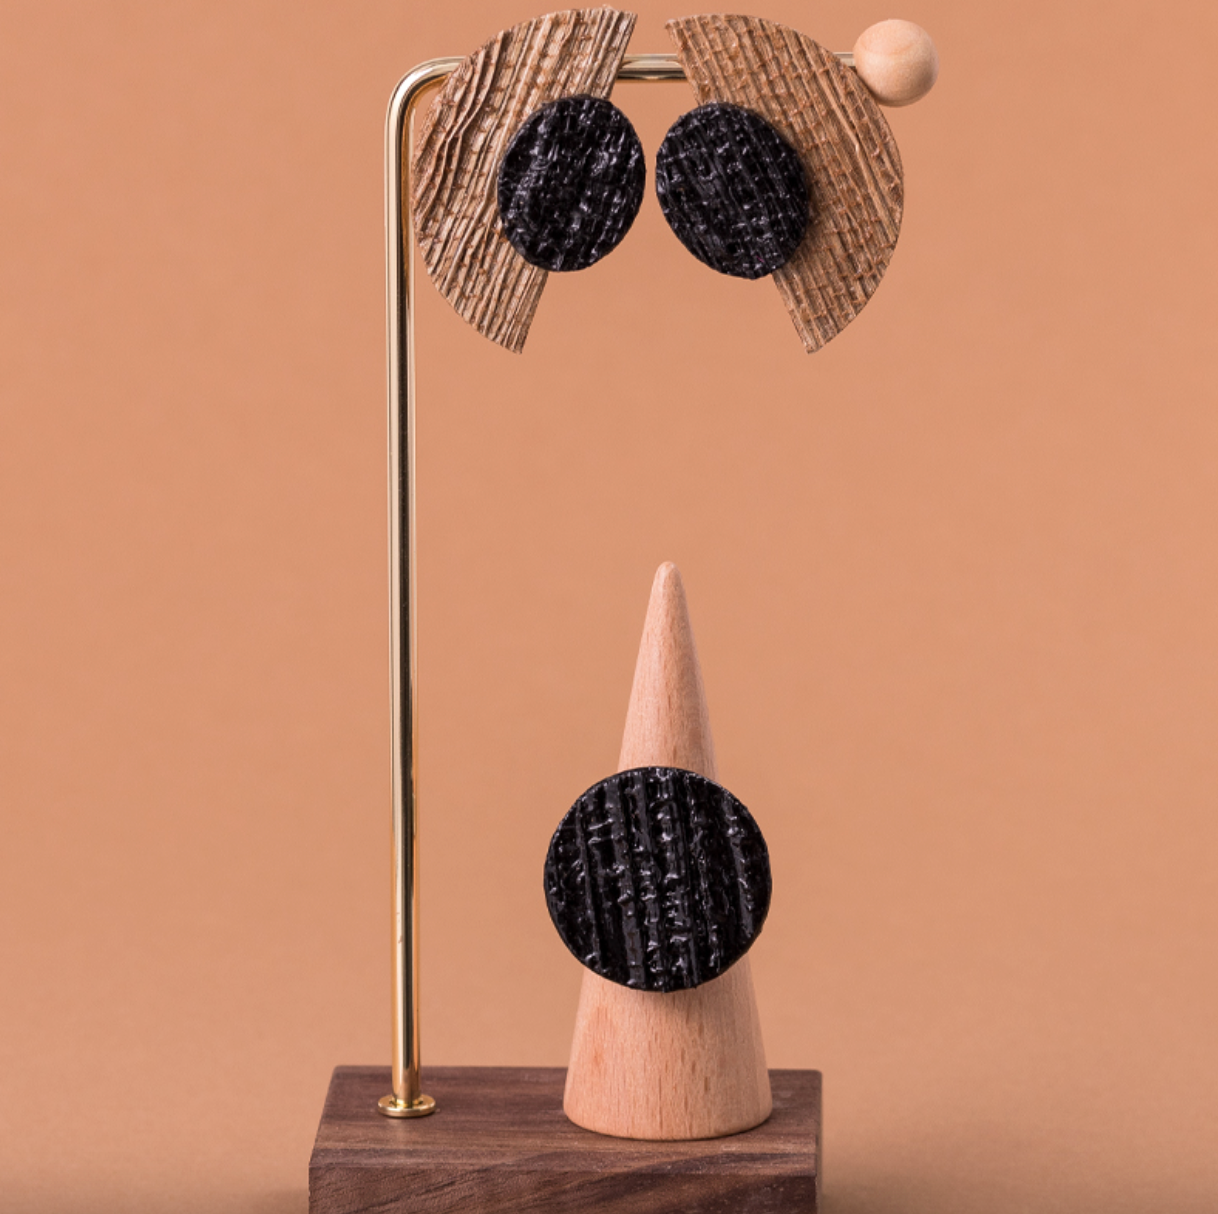 Black Half Moon Earrings: Stylish and Statement Earrings Made from Banana Fibre